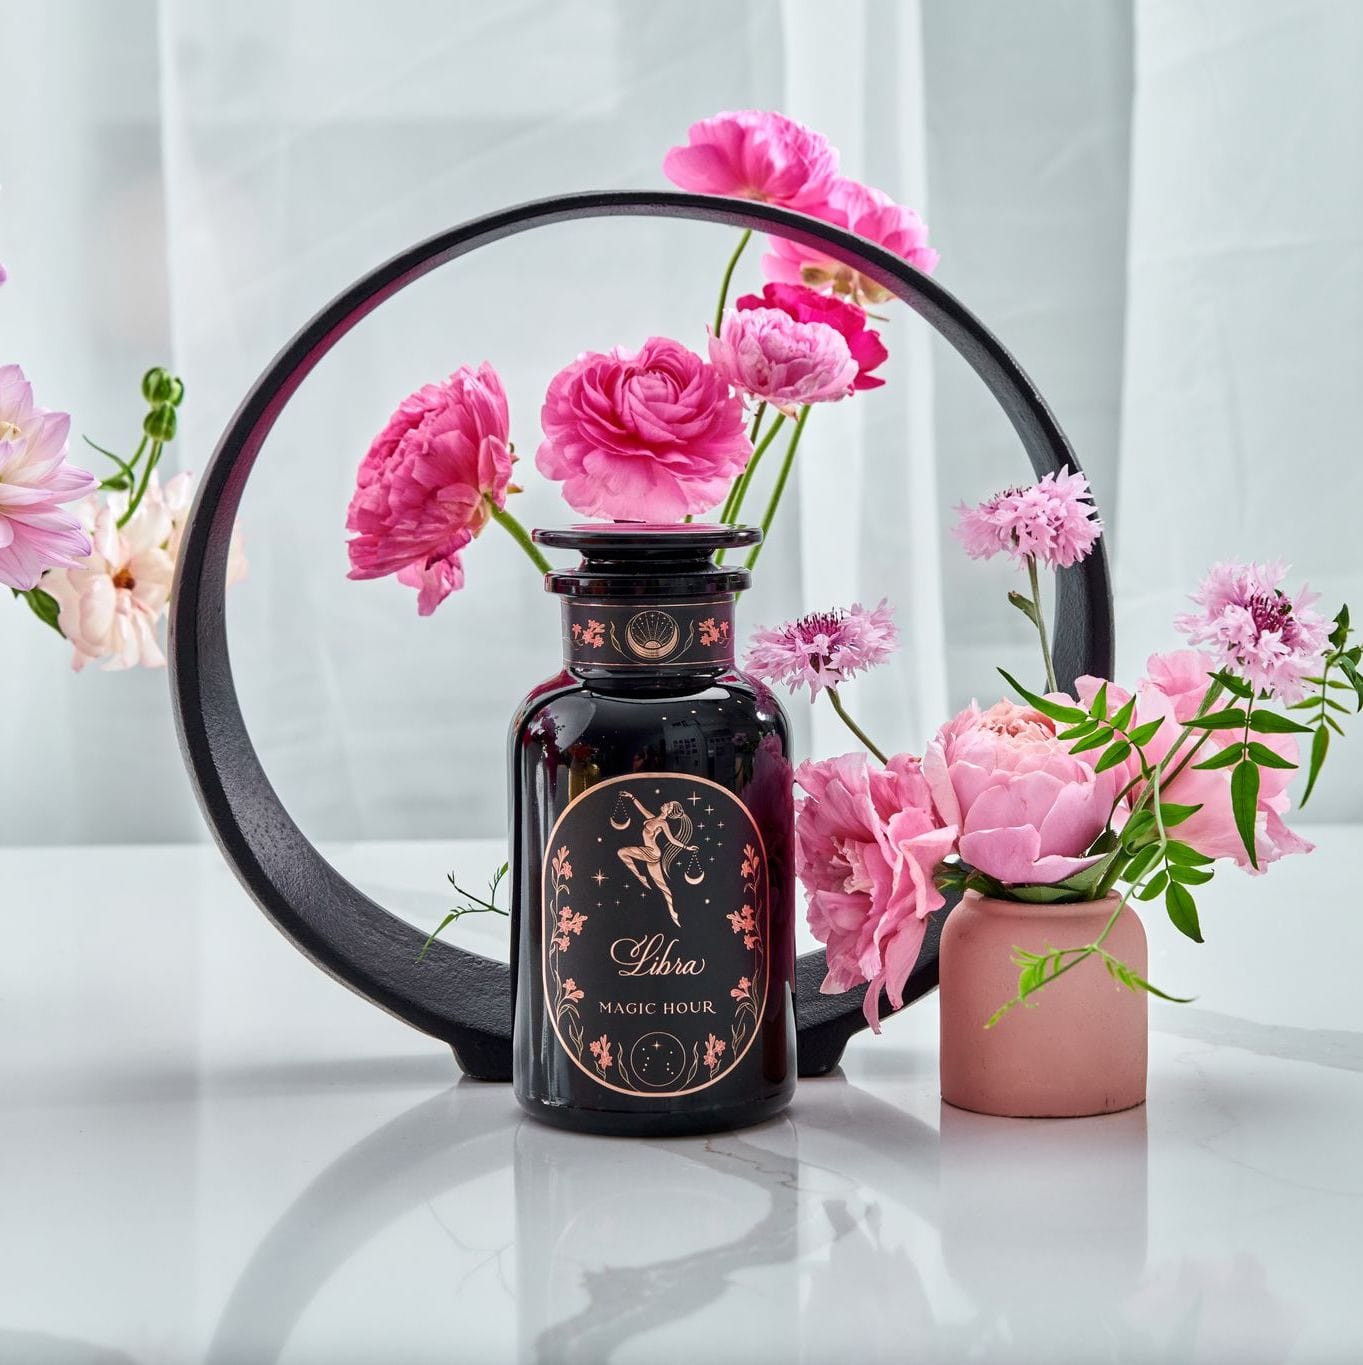 A black ring stand holds pink flowers, framing a dark bottle labeled "Magic Hour Libra- Pistachio-Rose Persian Love Cake Tea with White Pearls & Shatavari" in the foreground. The bottle has a floral design and is accompanied by more pink flowers in a small vase on the right. White fabric drapes in the background, adding an elegant touch to this scene.